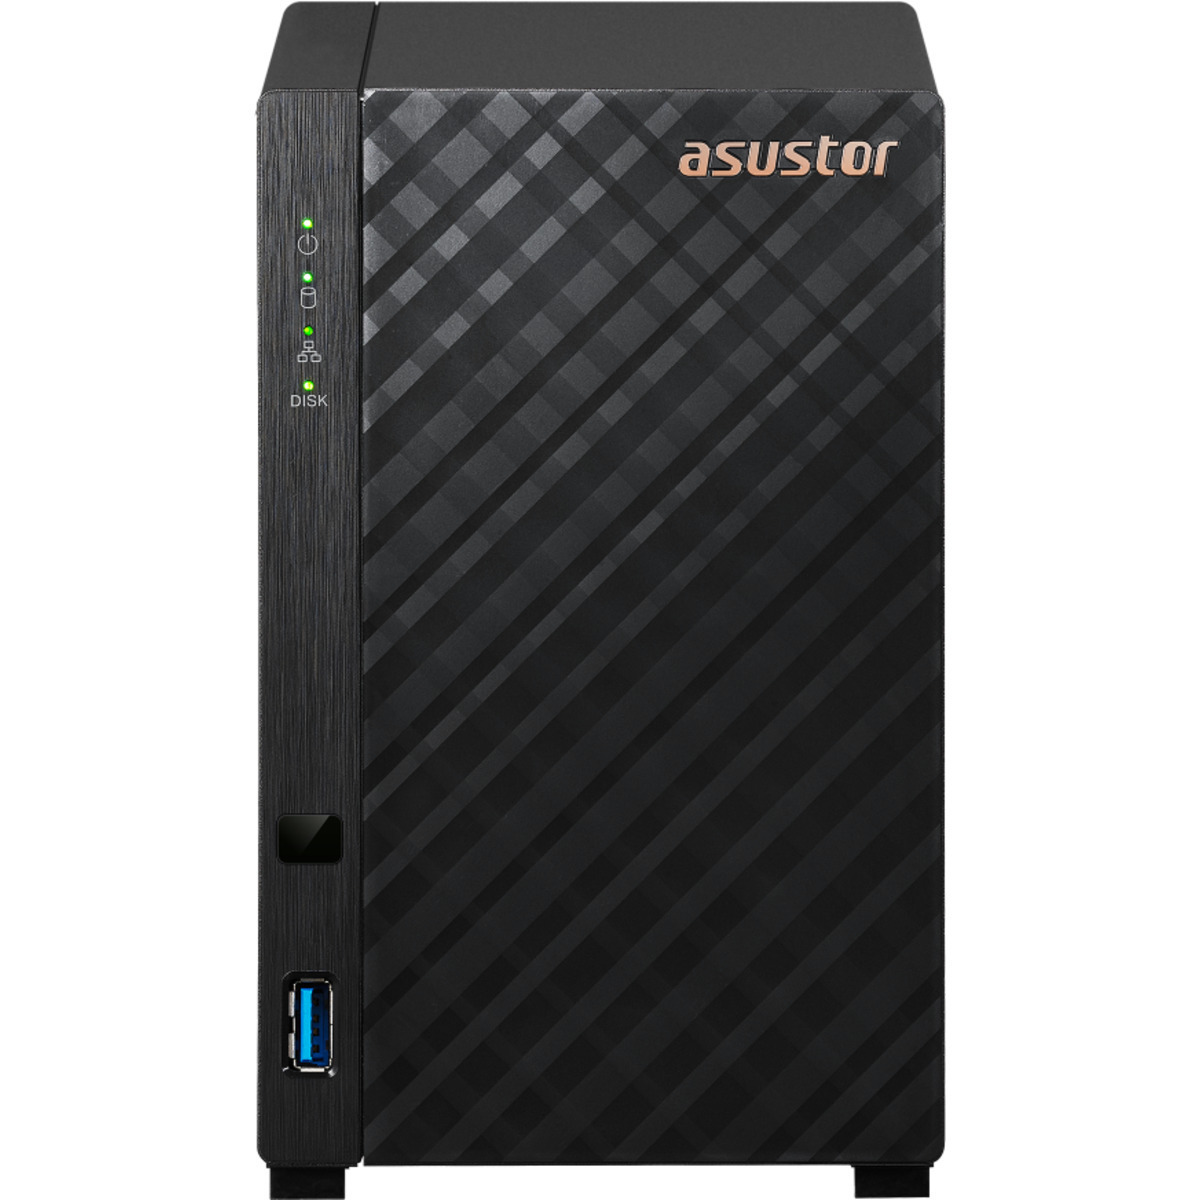 buy $722 ASUSTOR DRIVESTOR 2 AS1102T 16tb Desktop NAS - Network Attached Storage Device 2x8000gb Western Digital Red Pro WD8003FFBX 3.5 7200rpm SATA 6Gb/s HDD NAS Class Drives Installed - Burn-In Tested - nas headquarters buy network attached storage server device das new raid-5 free shipping usa DRIVESTOR 2 AS1102T